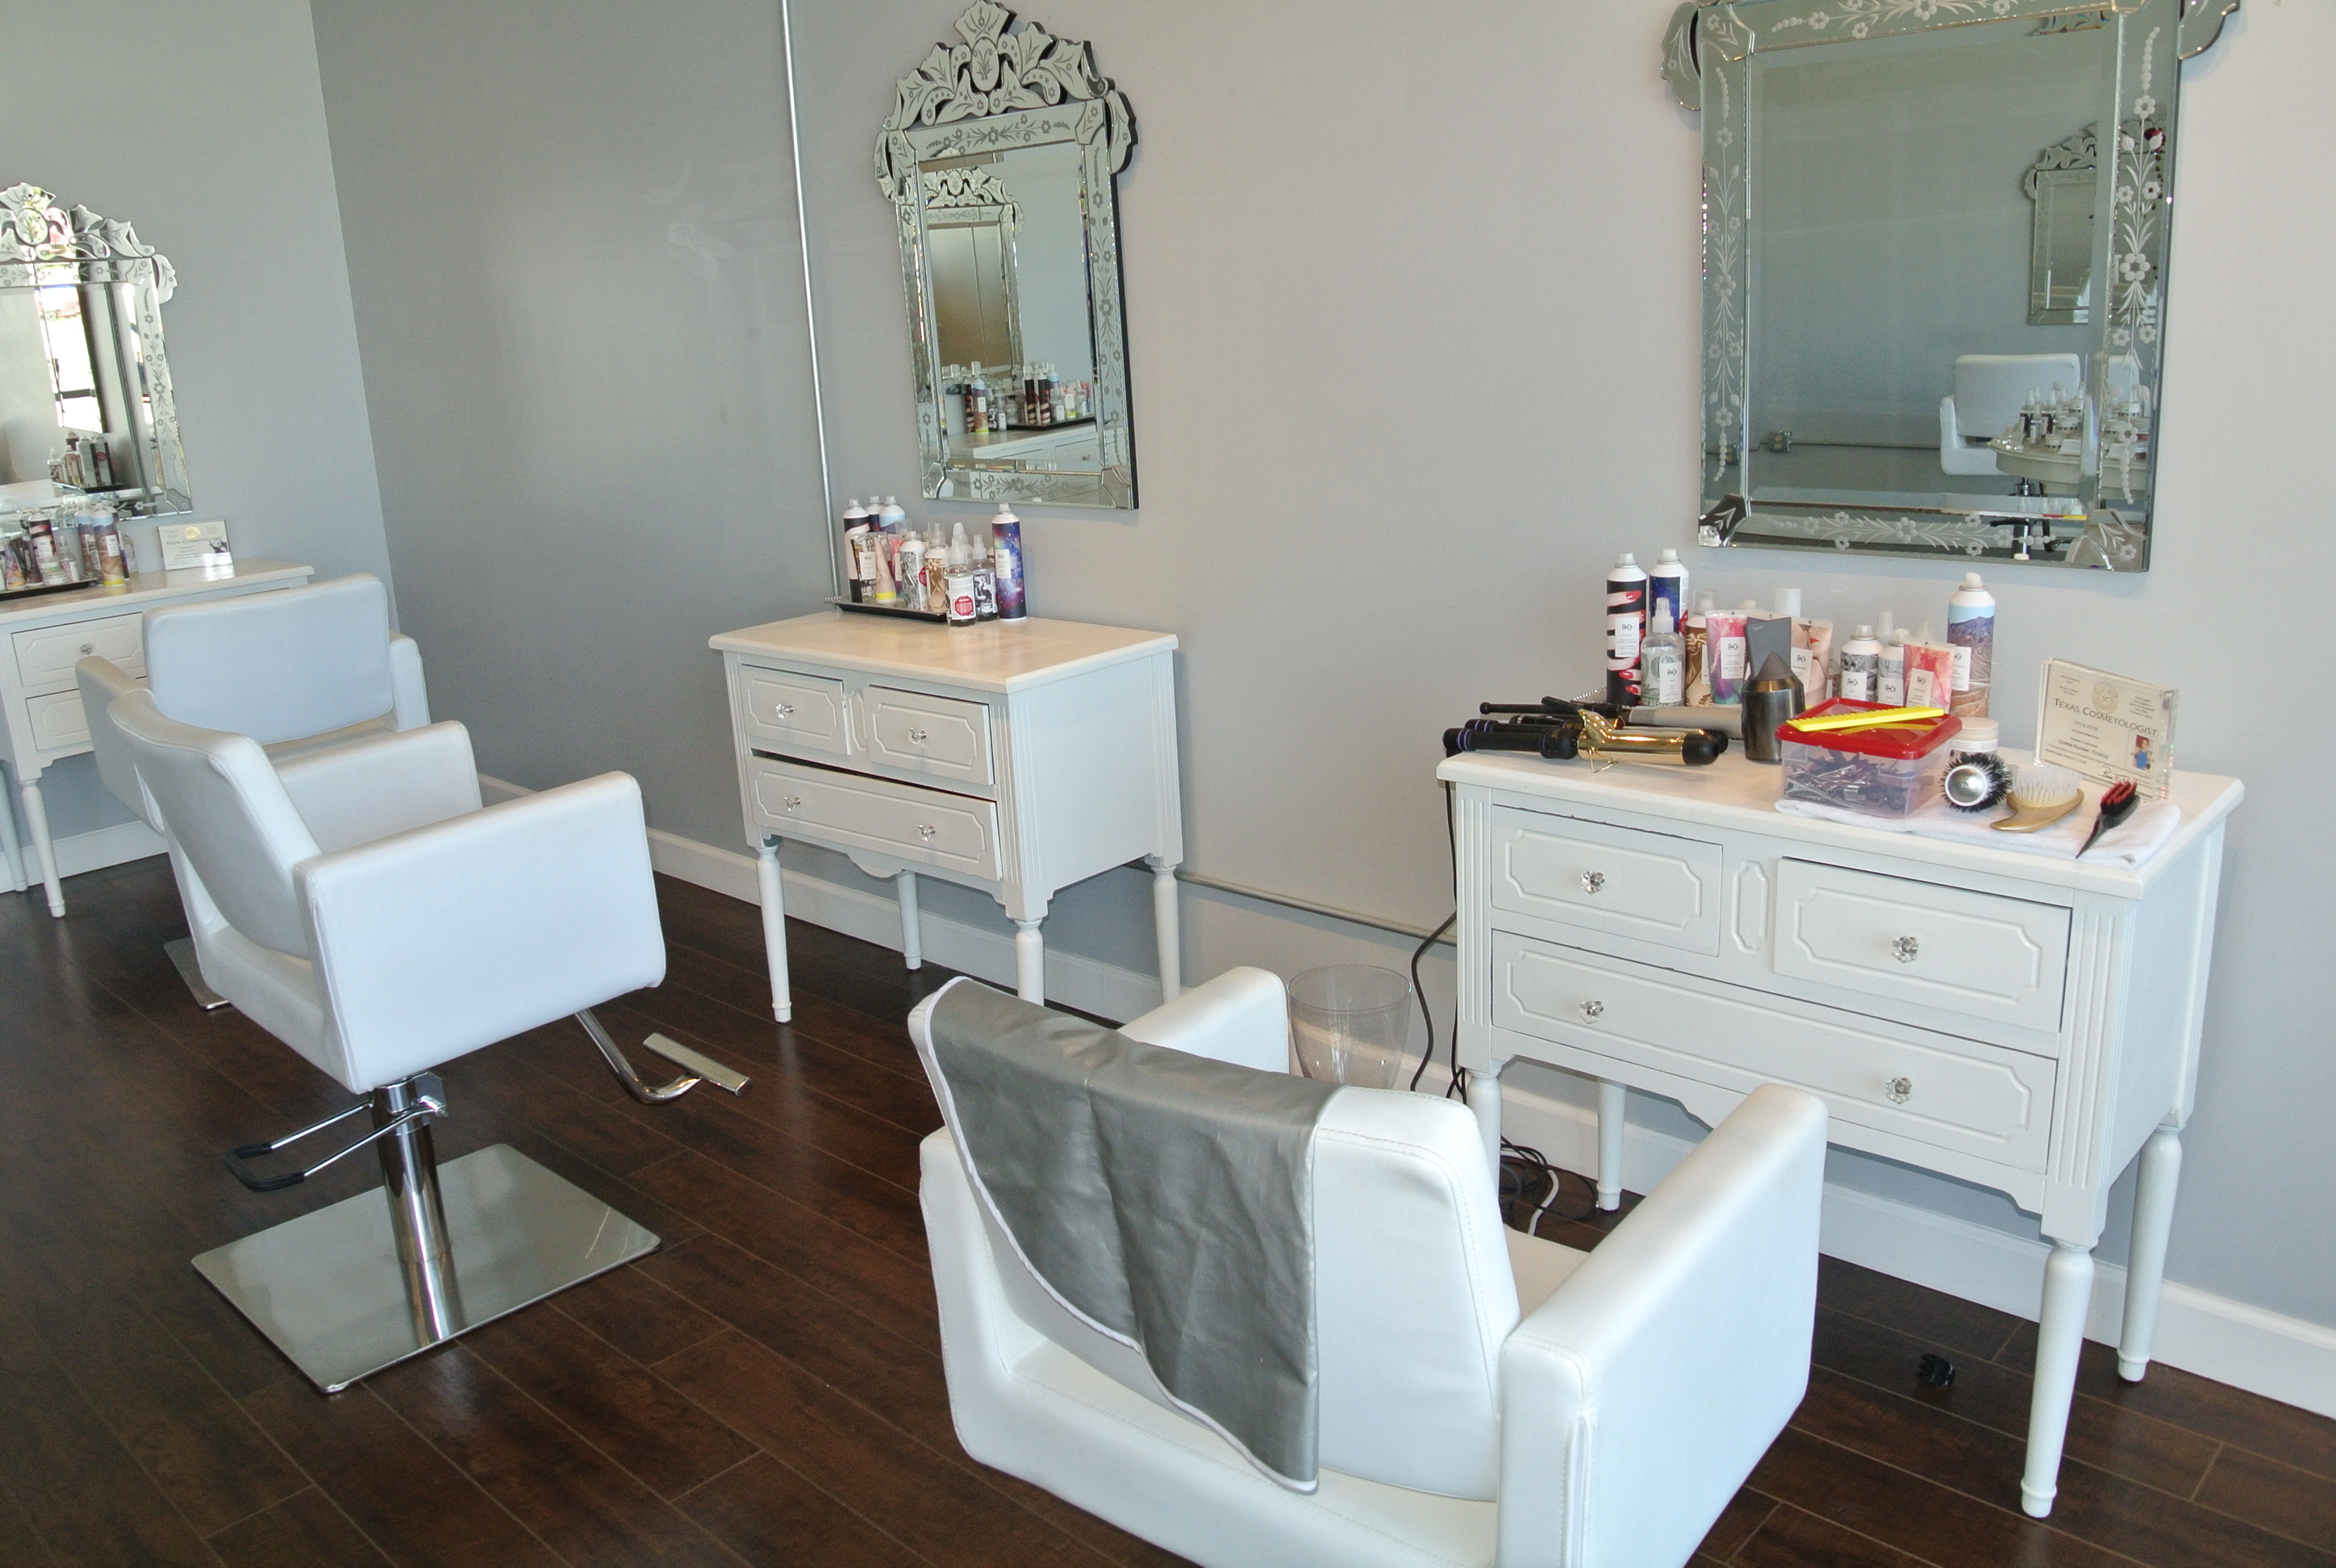 Gettin' Dolled Up with Dry Society Styling Lounge - The Nueva Latina